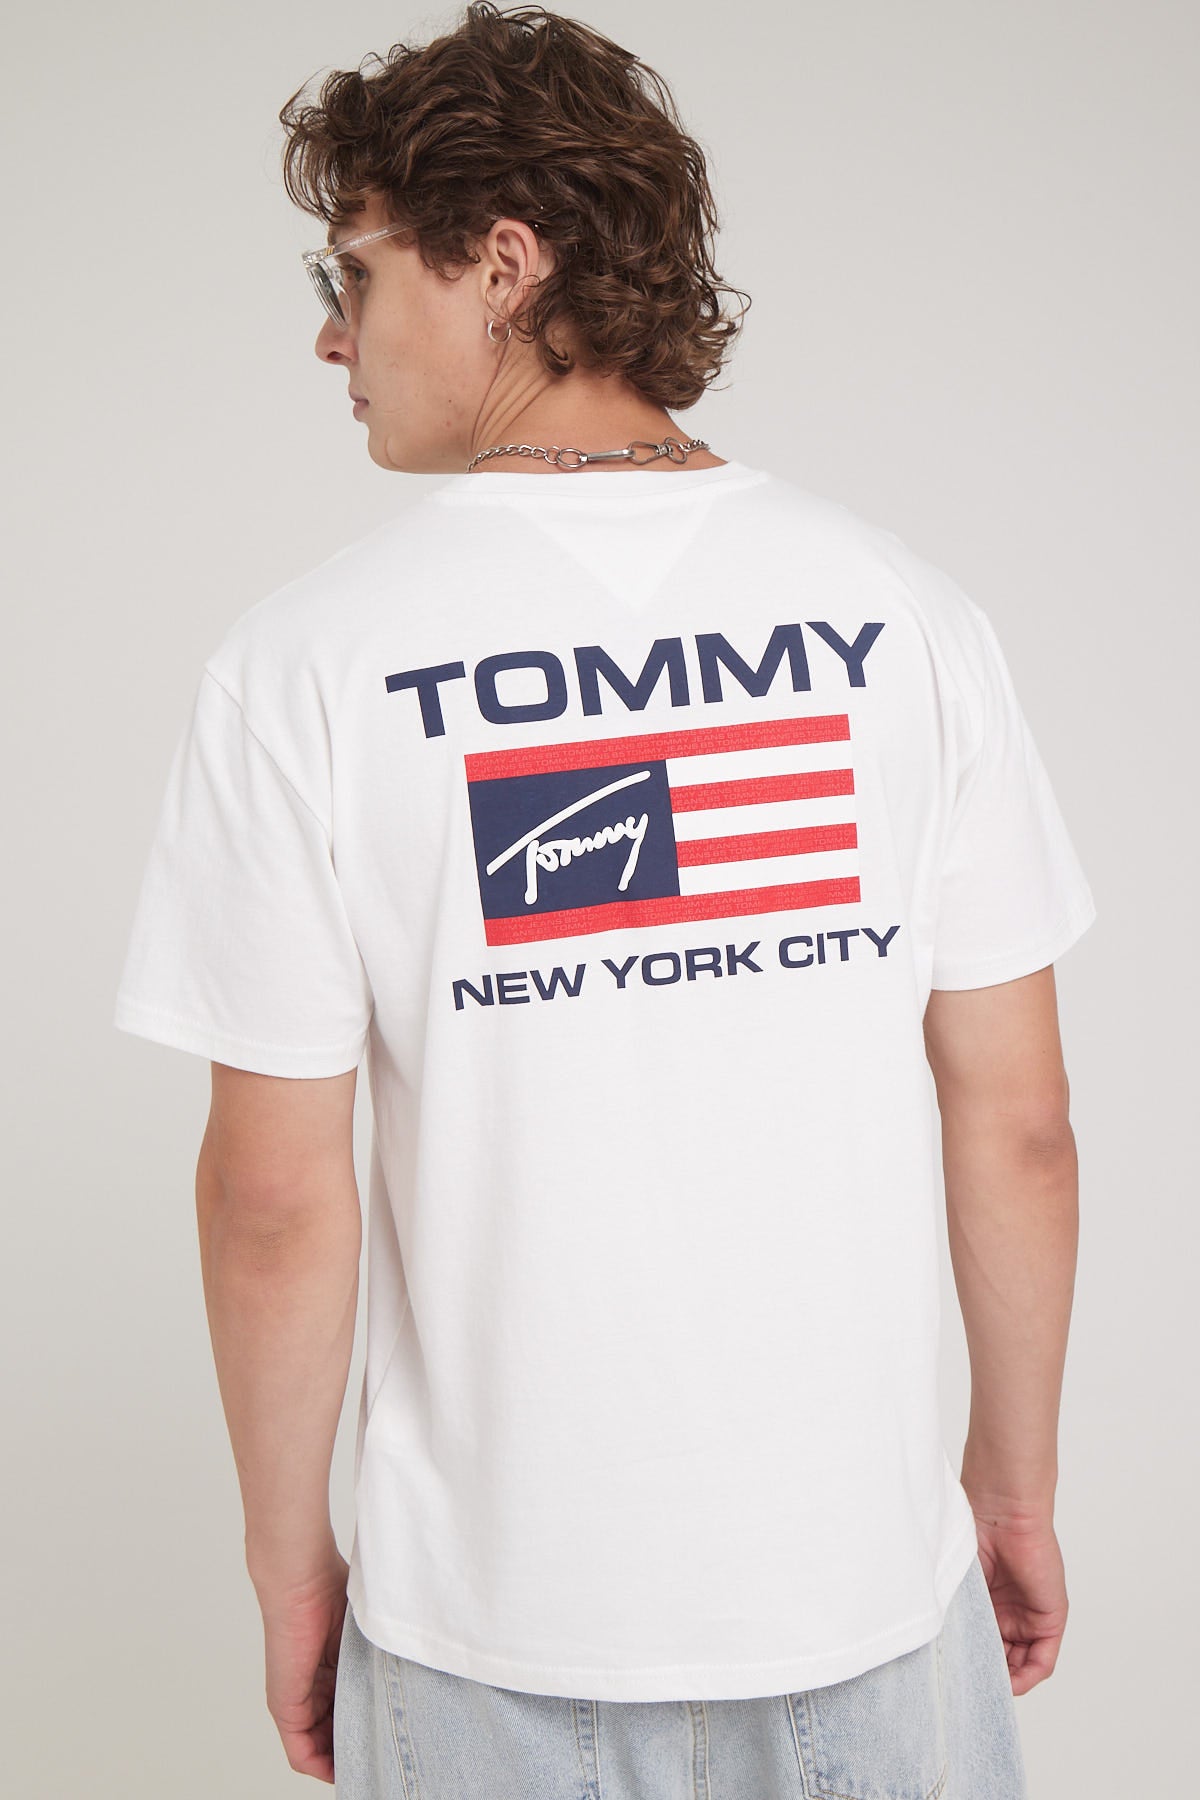 Tee White – Universal Tommy Flag TJM CLSC Store Athletic Jeans